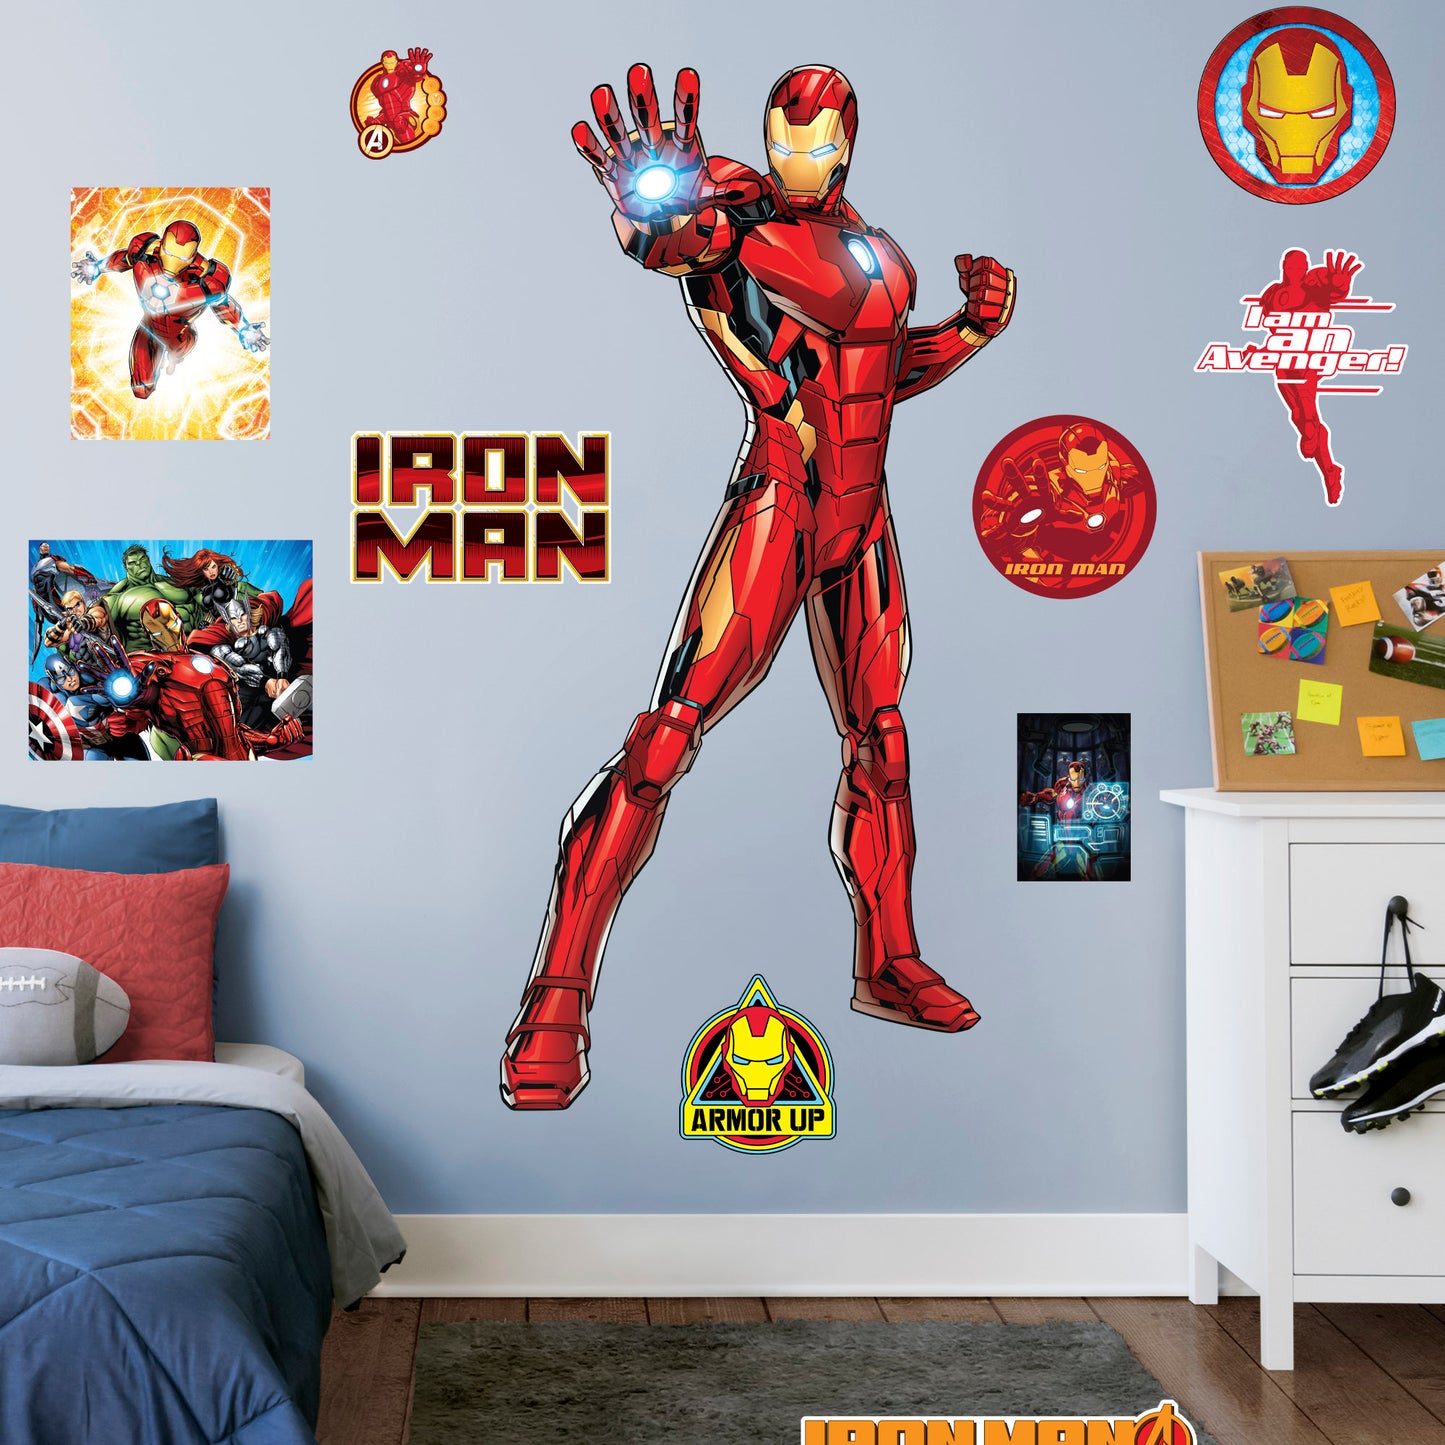 Life-Size Character + 10 Decals (38.5"W x 78"H)